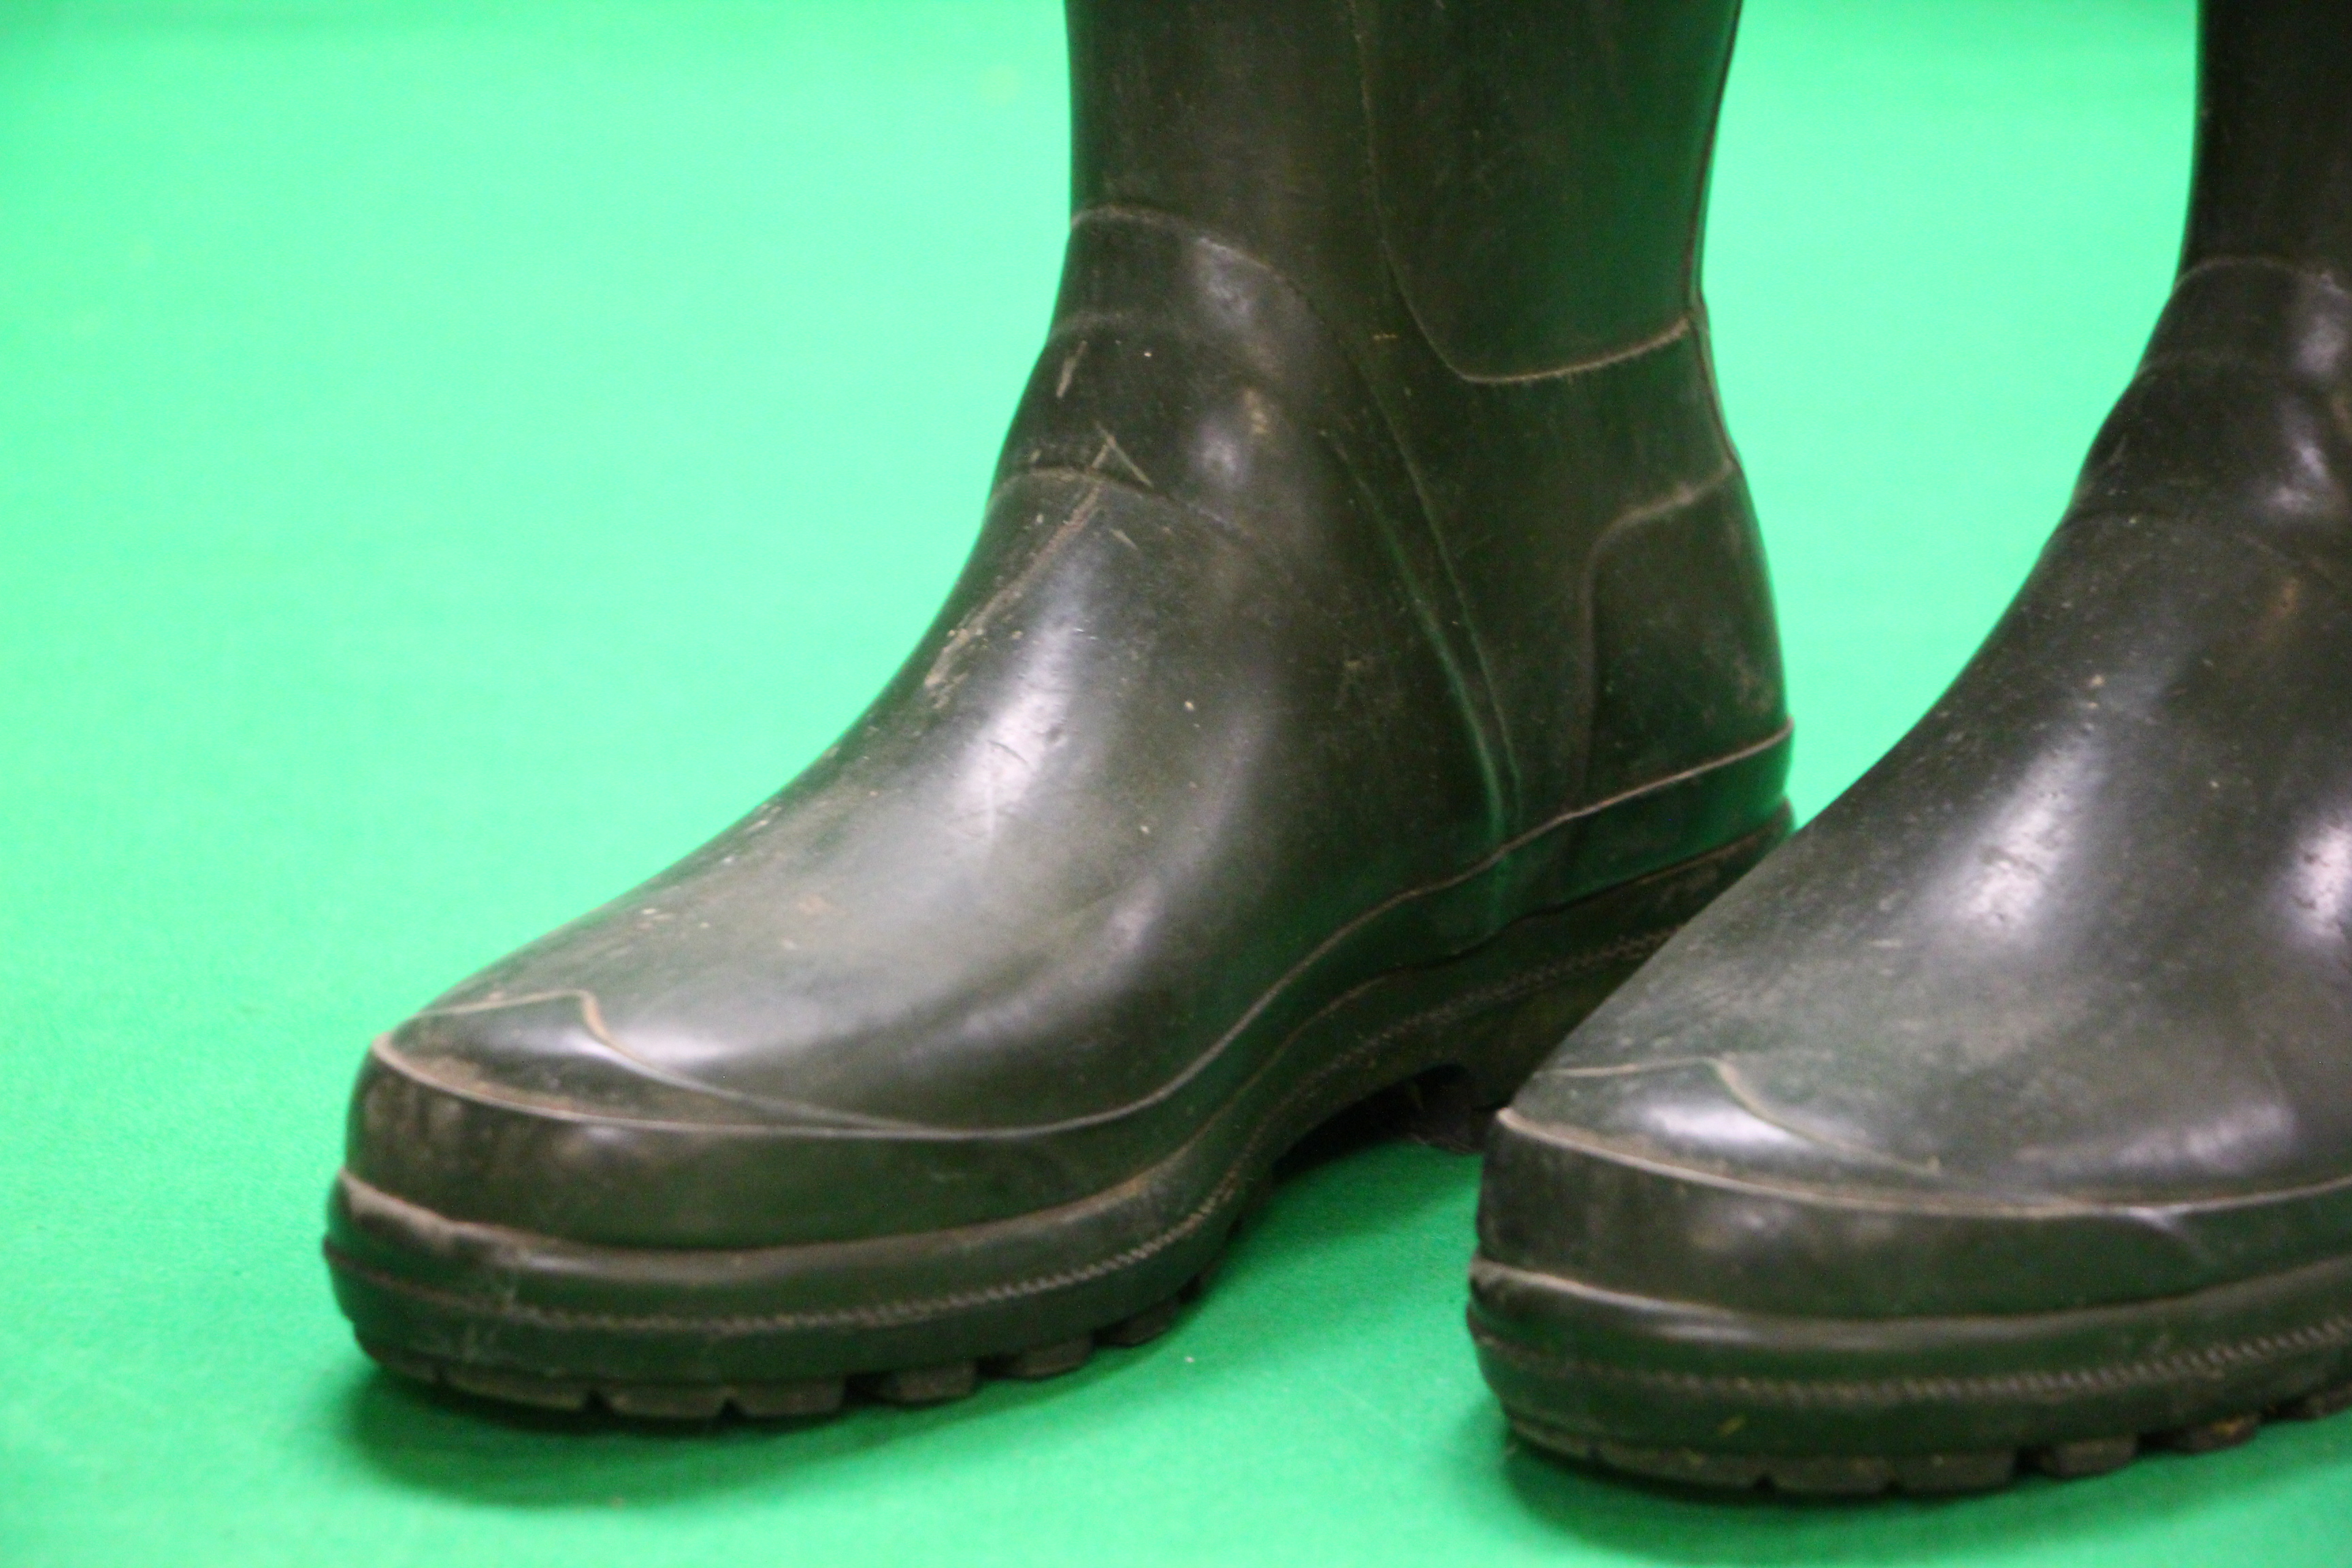 A PAIR OF GENTS HUNTER WELLIE BOOTS - NO VISIBLE SIZE - APPROX SIZE 9 - Image 5 of 6